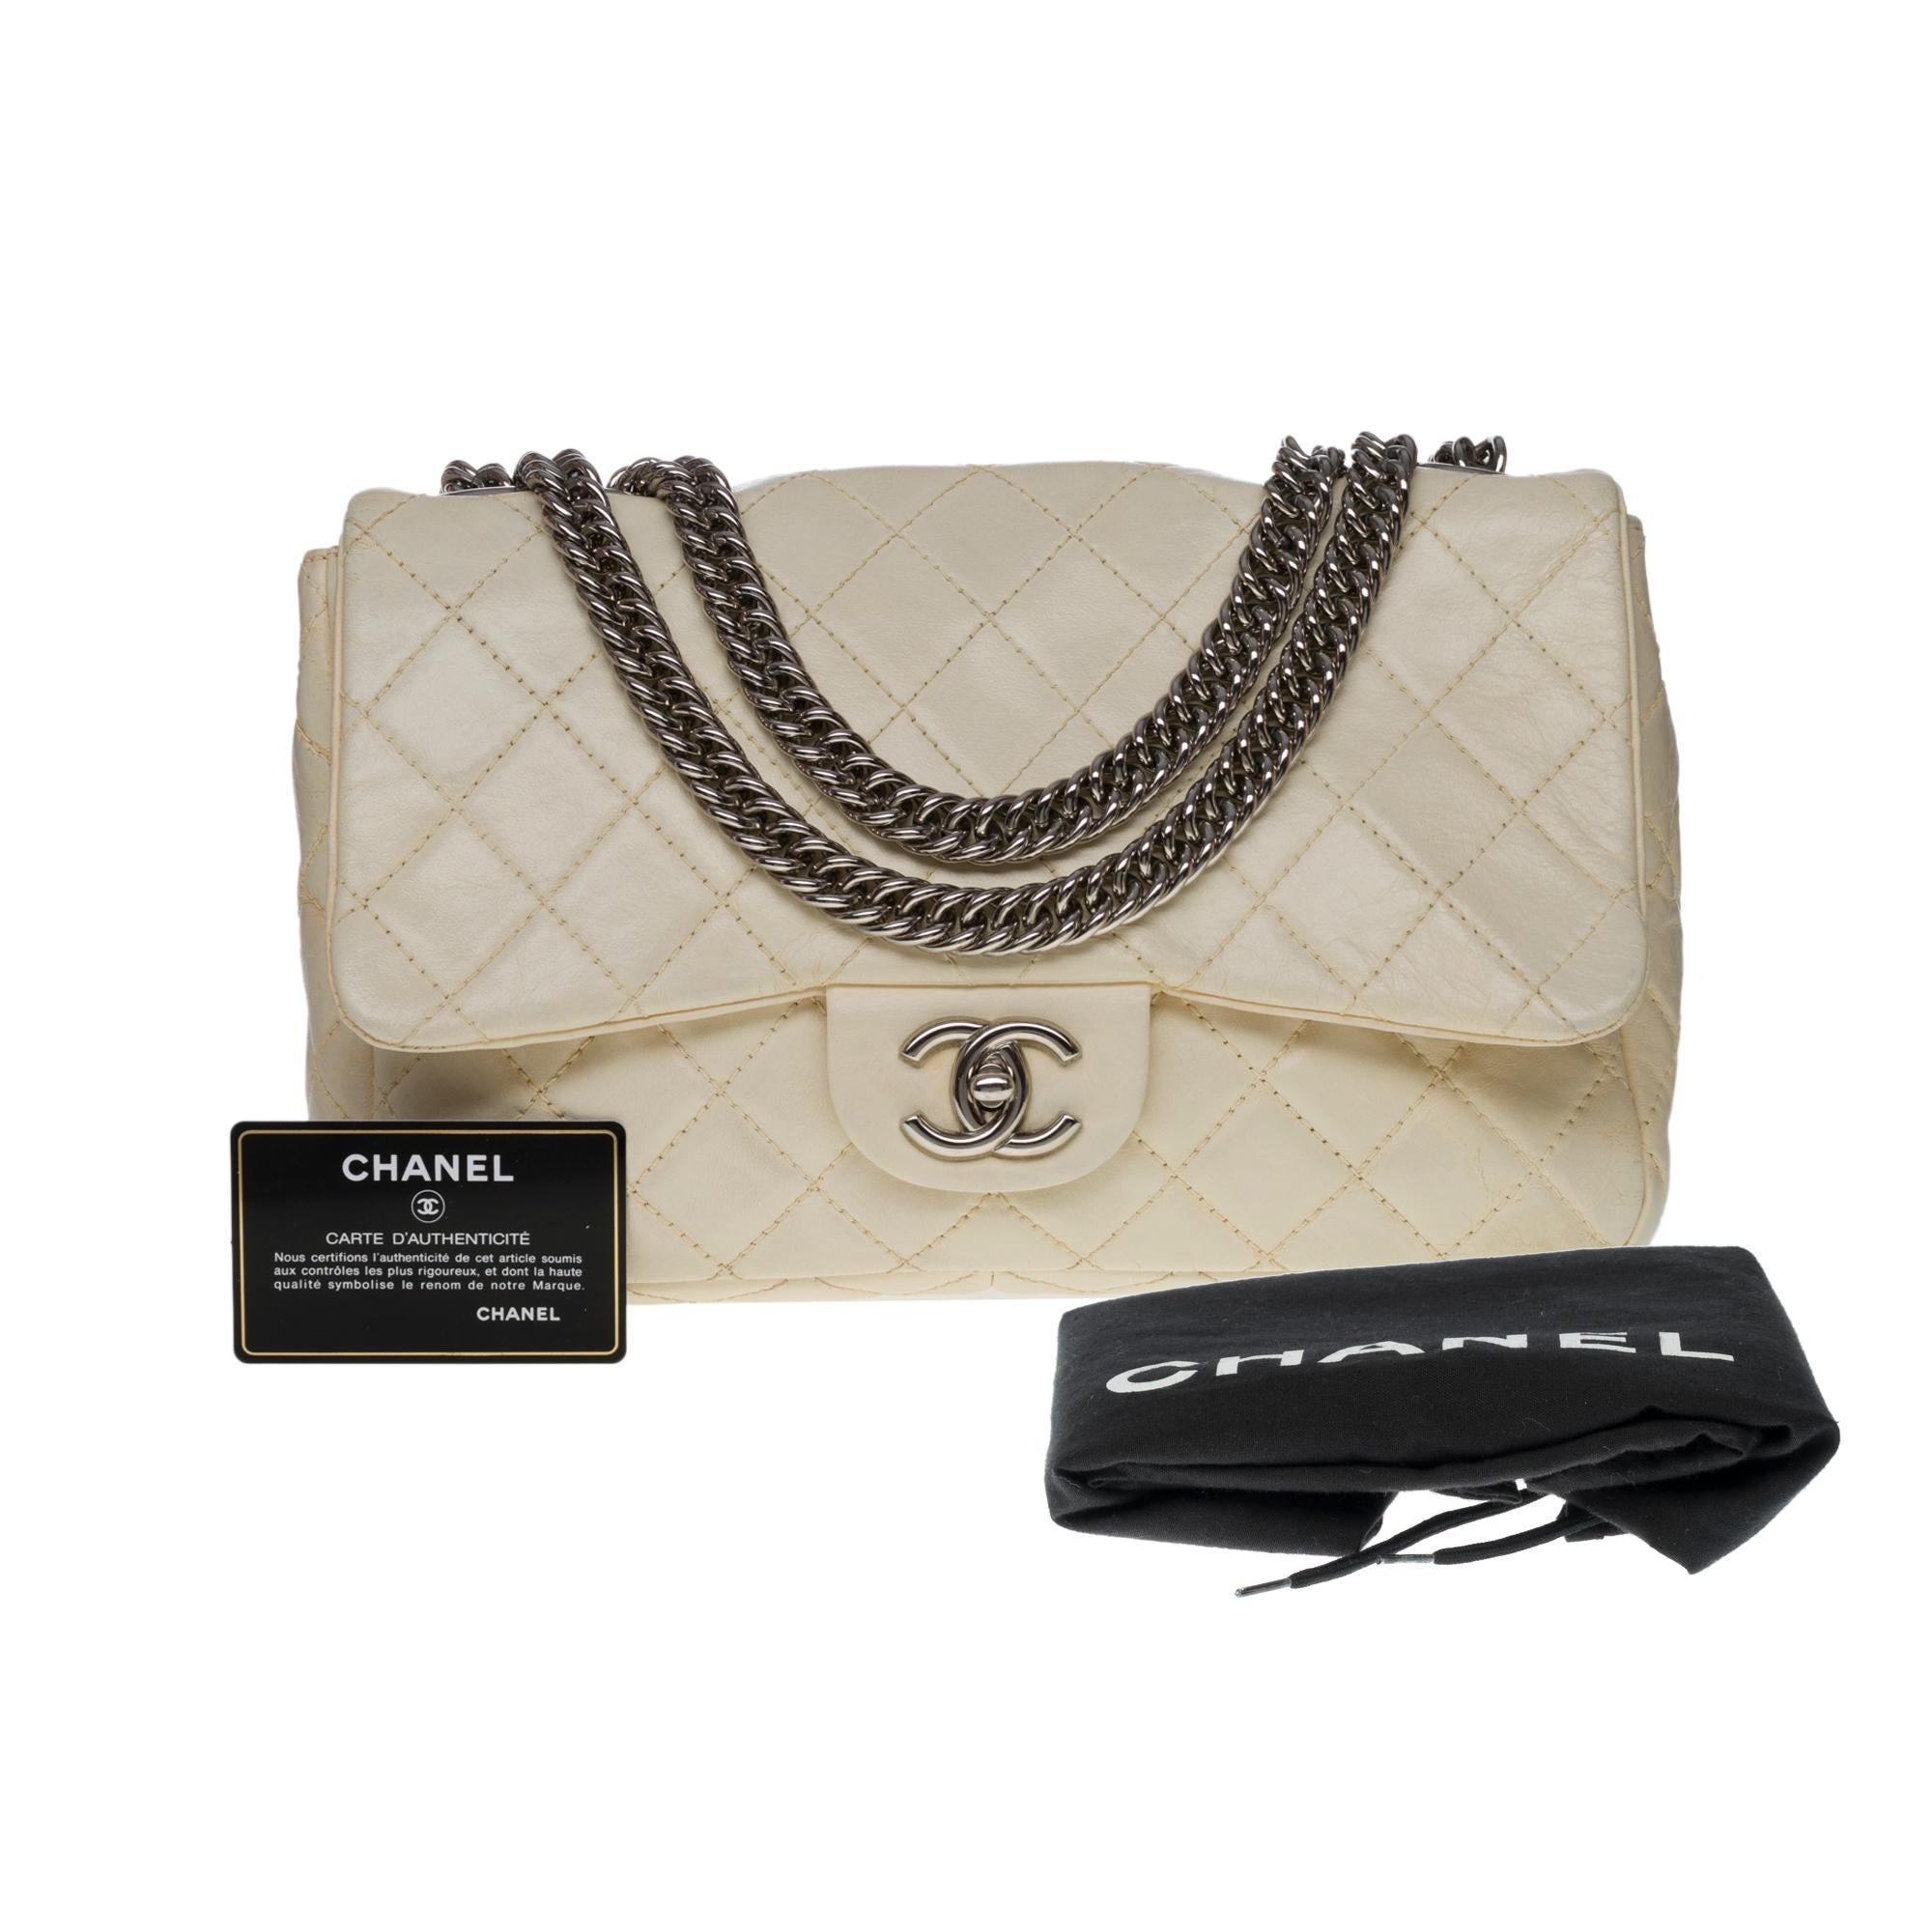 Chanel Timeless/Classic double Flap shoulder bag in Beige quilted lambskin, SHW 3